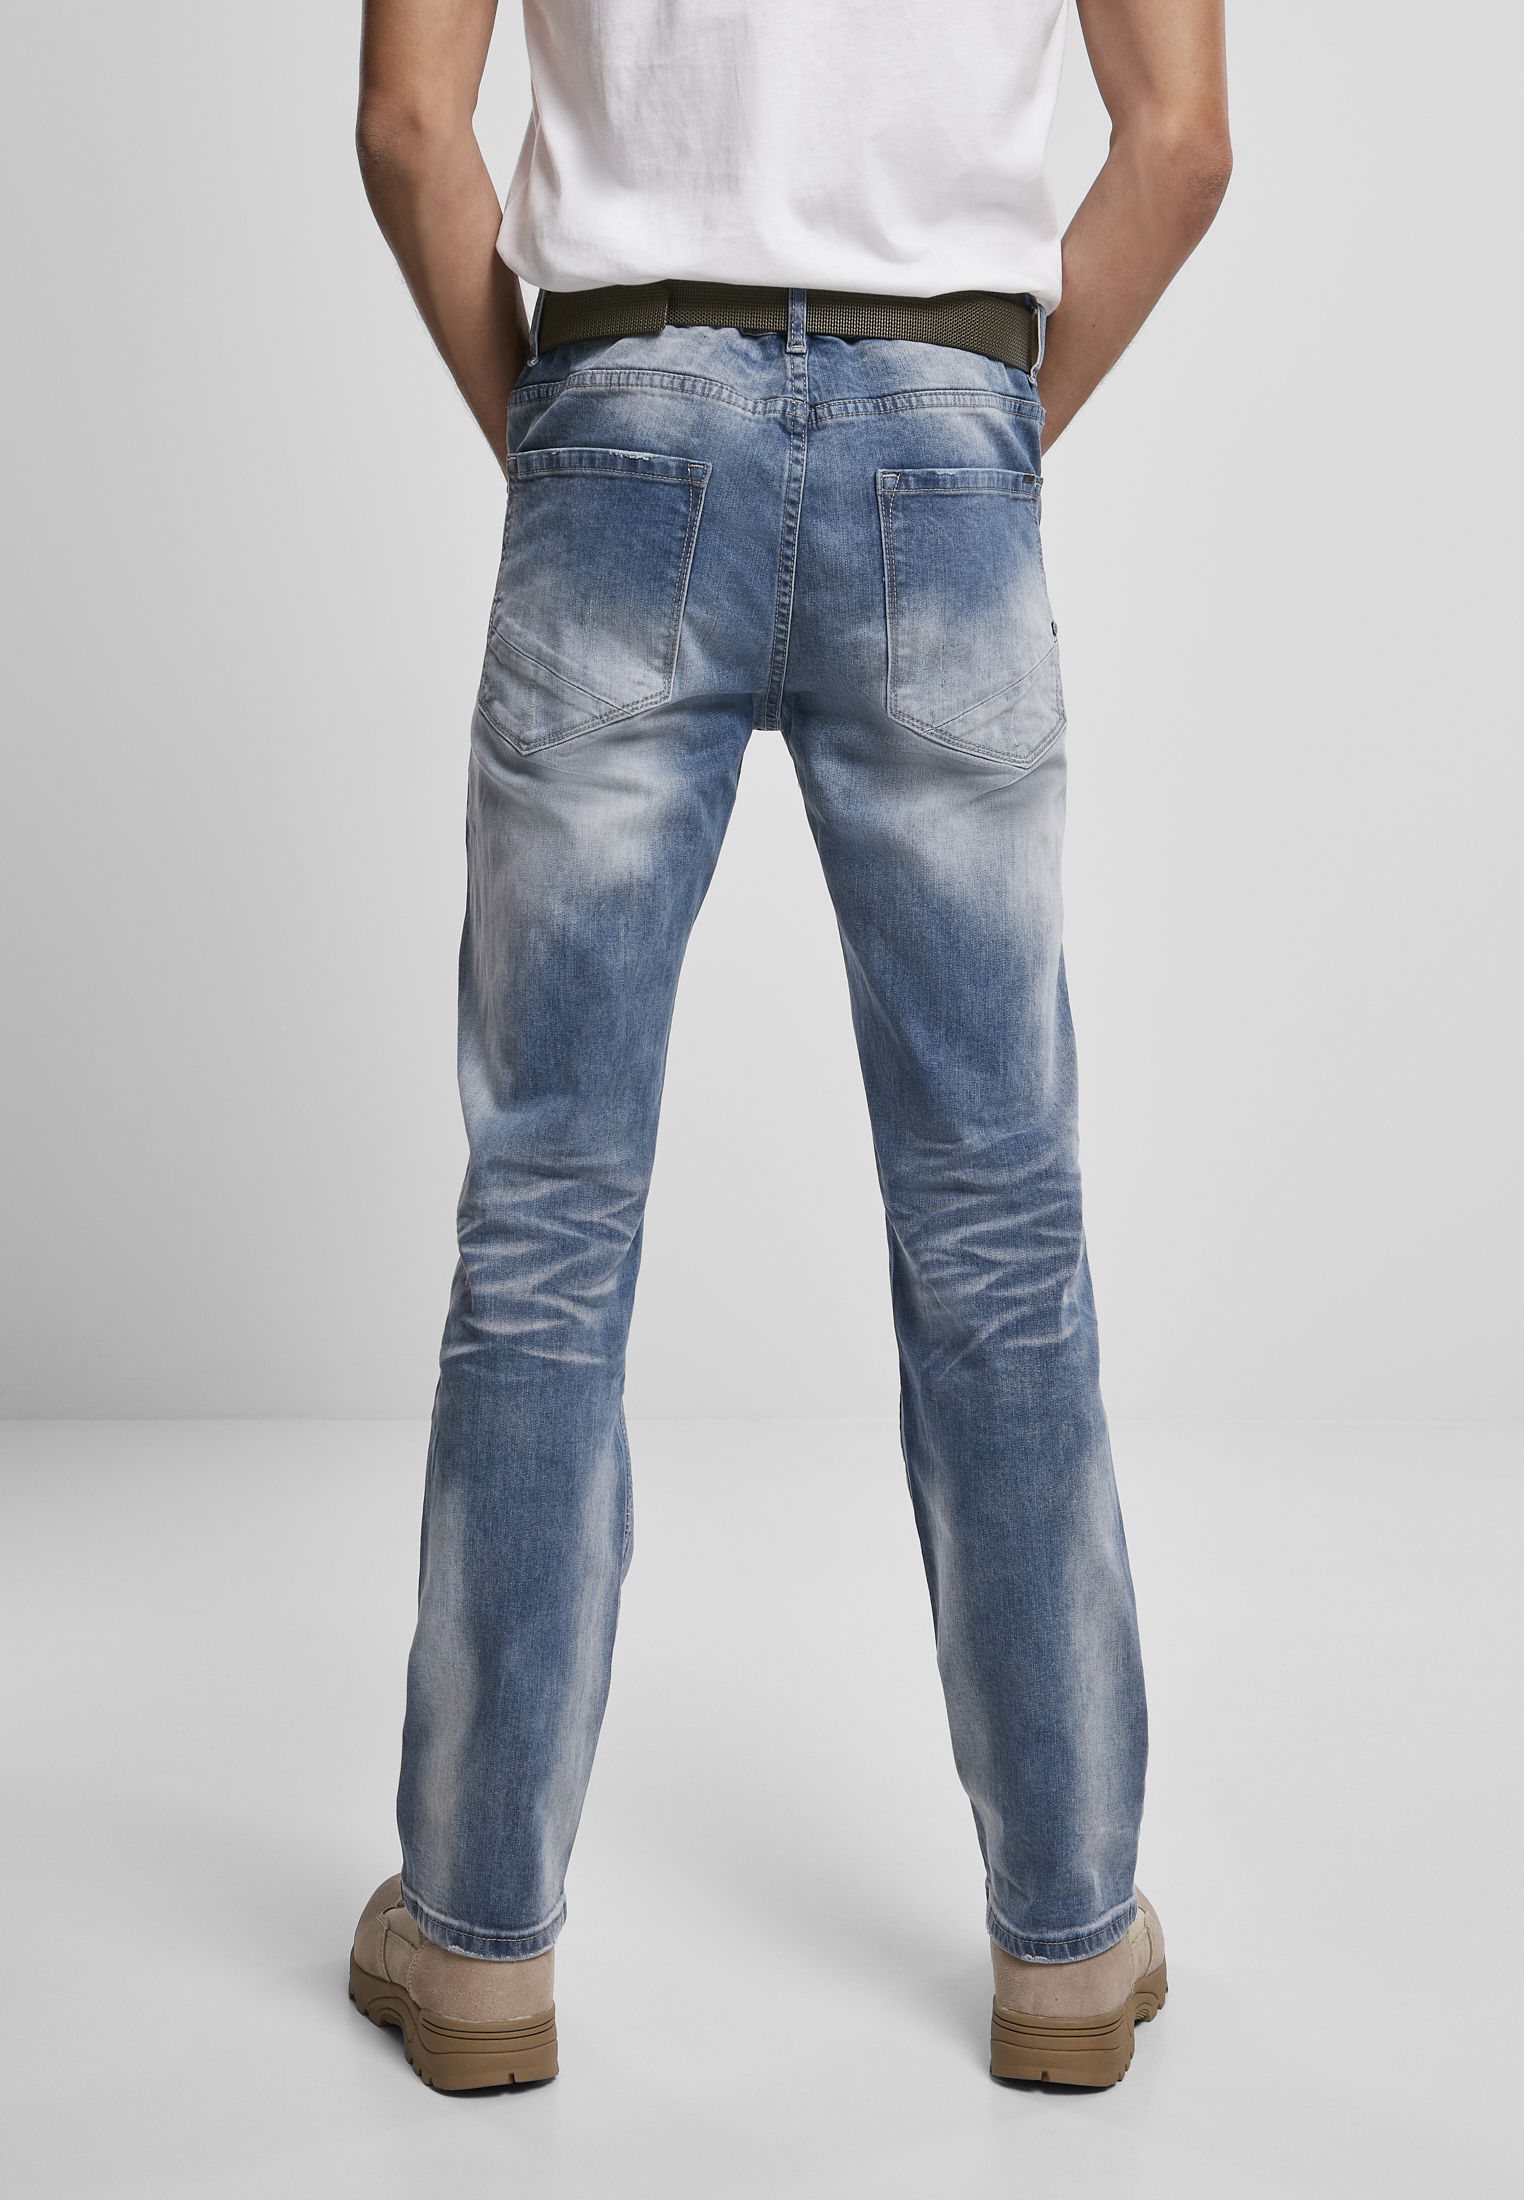 Hosen Will Washed Denim Jeans in Farbe blue washed